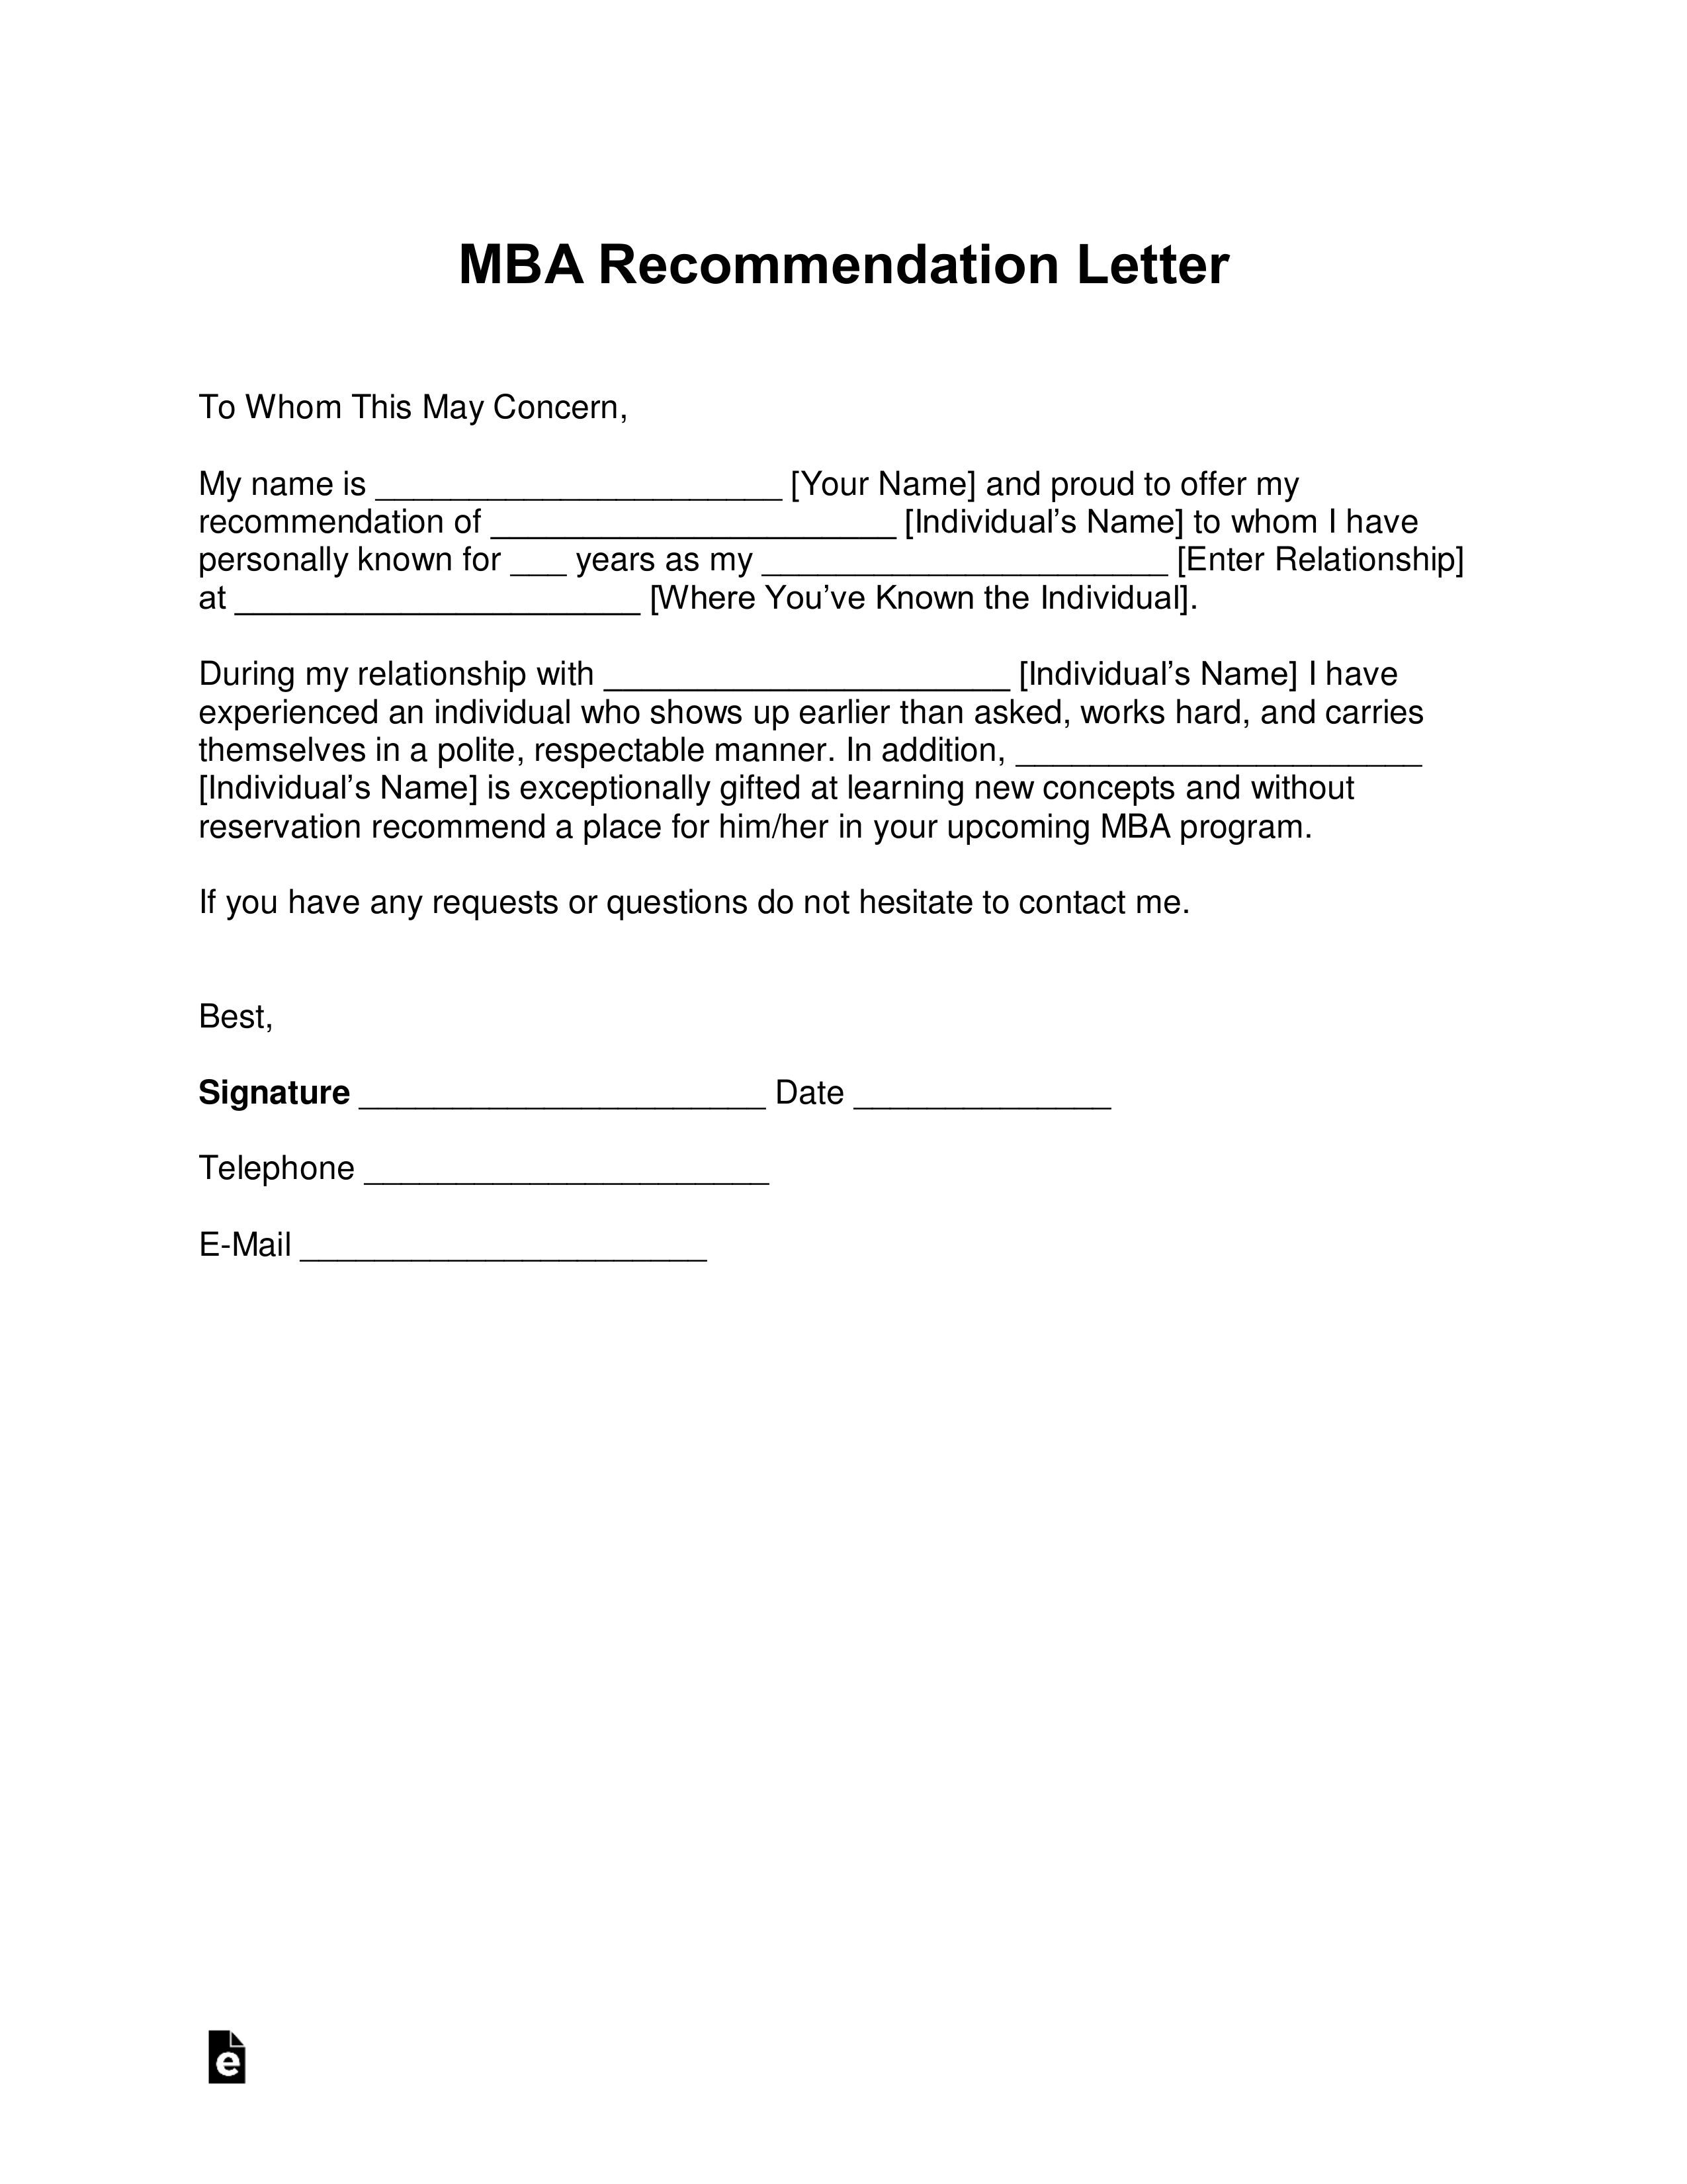 Sample Letter Of Recommendation For Principal from eforms.com